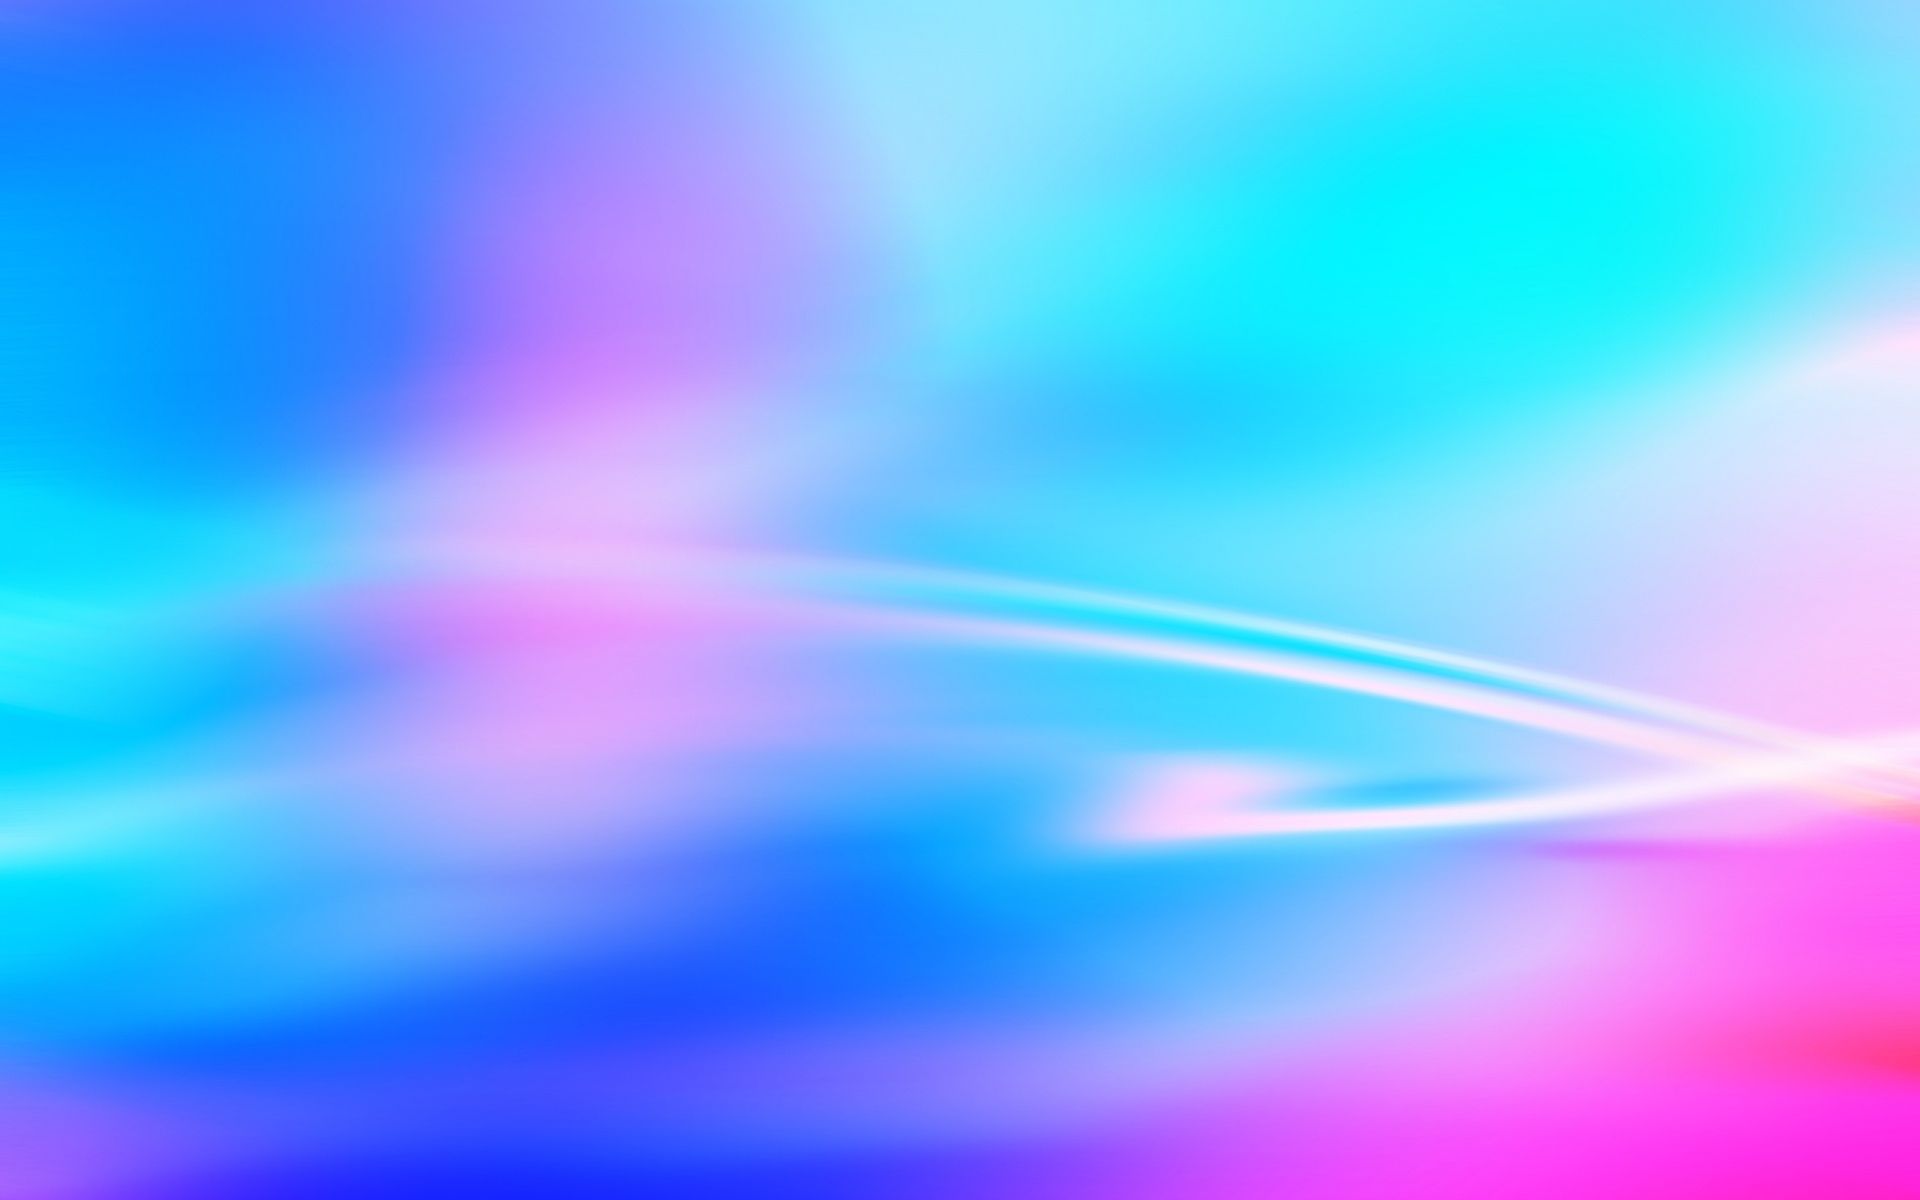 Light Pink Blue Smoke Plain Blue Background 4K 5K HD Abstract Wallpapers   HD Wallpapers  ID 72287